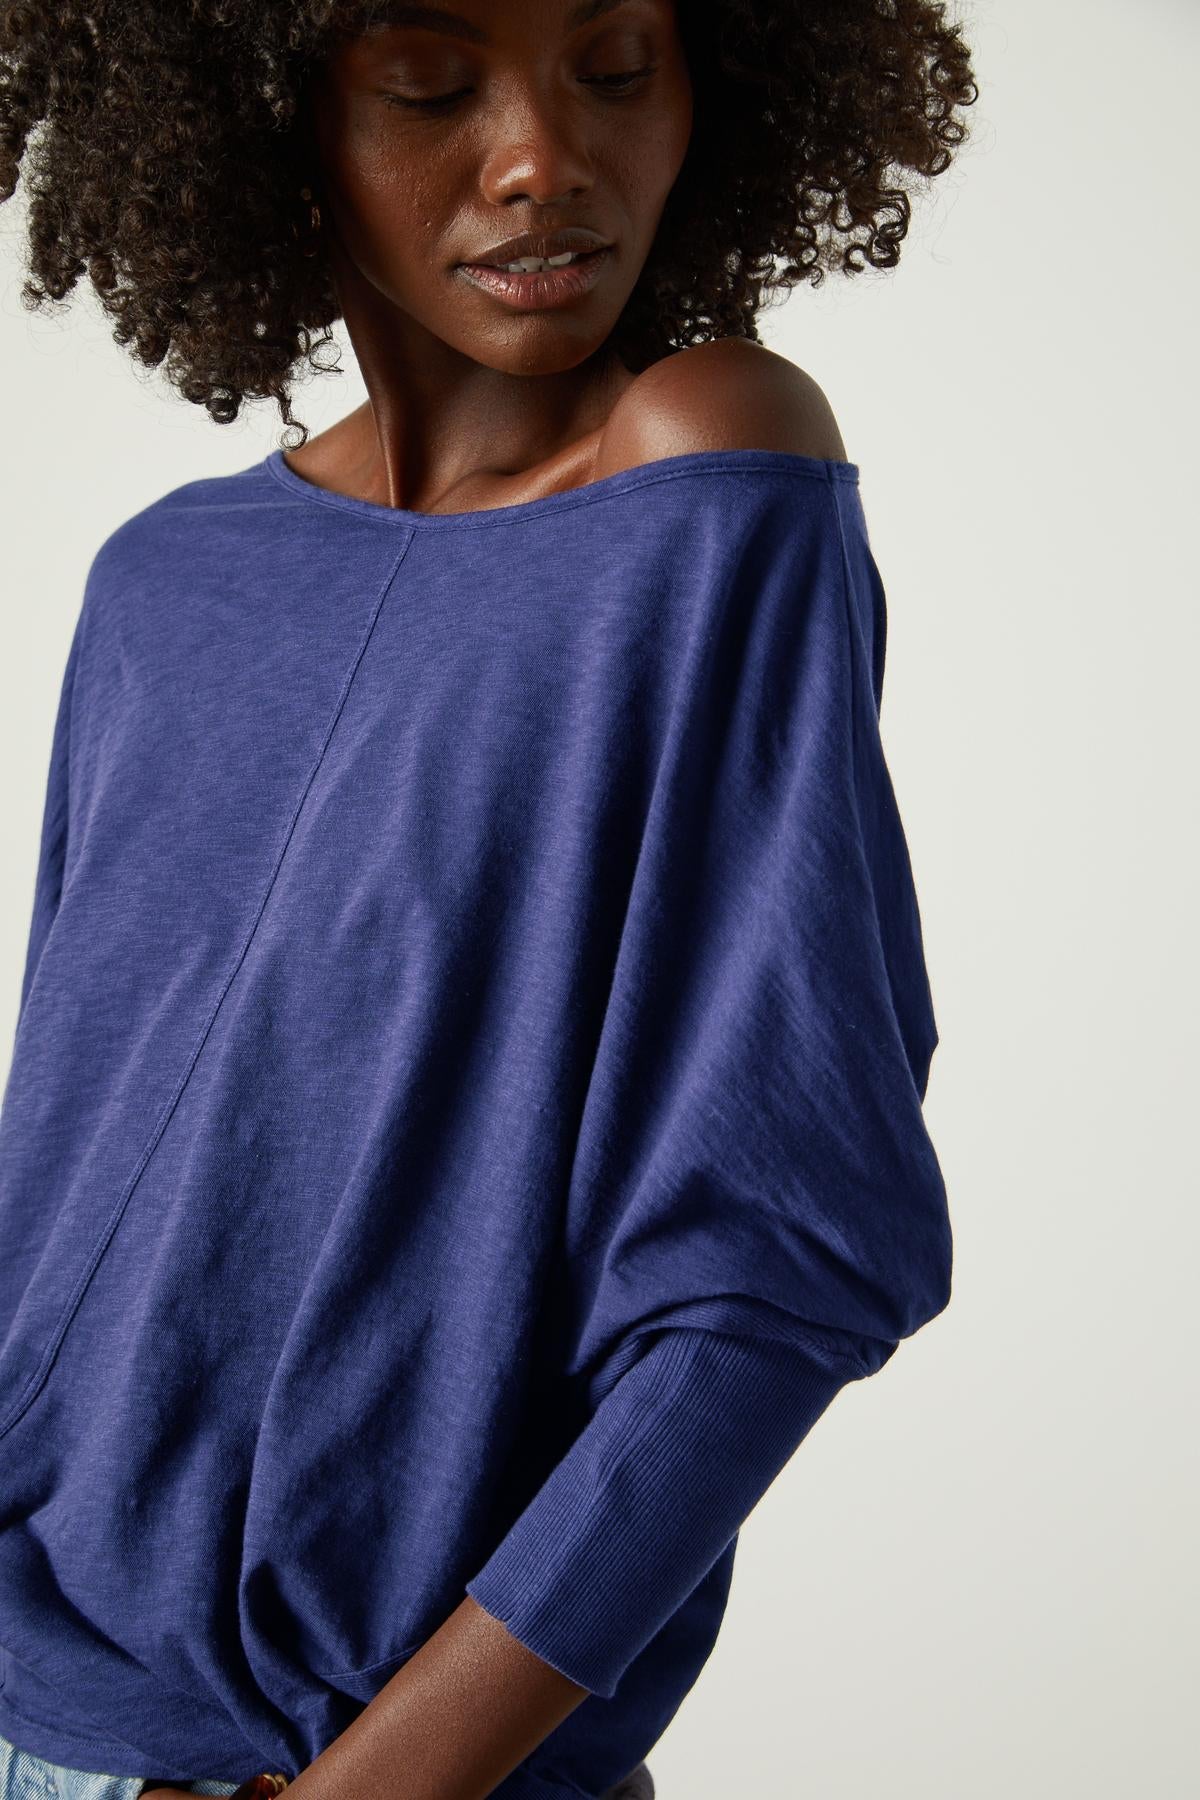 A woman wearing a blue JOSS DOLMAN SLEEVE TEE by Velvet by Graham & Spencer top with ruffled sleeves.-35206719275201